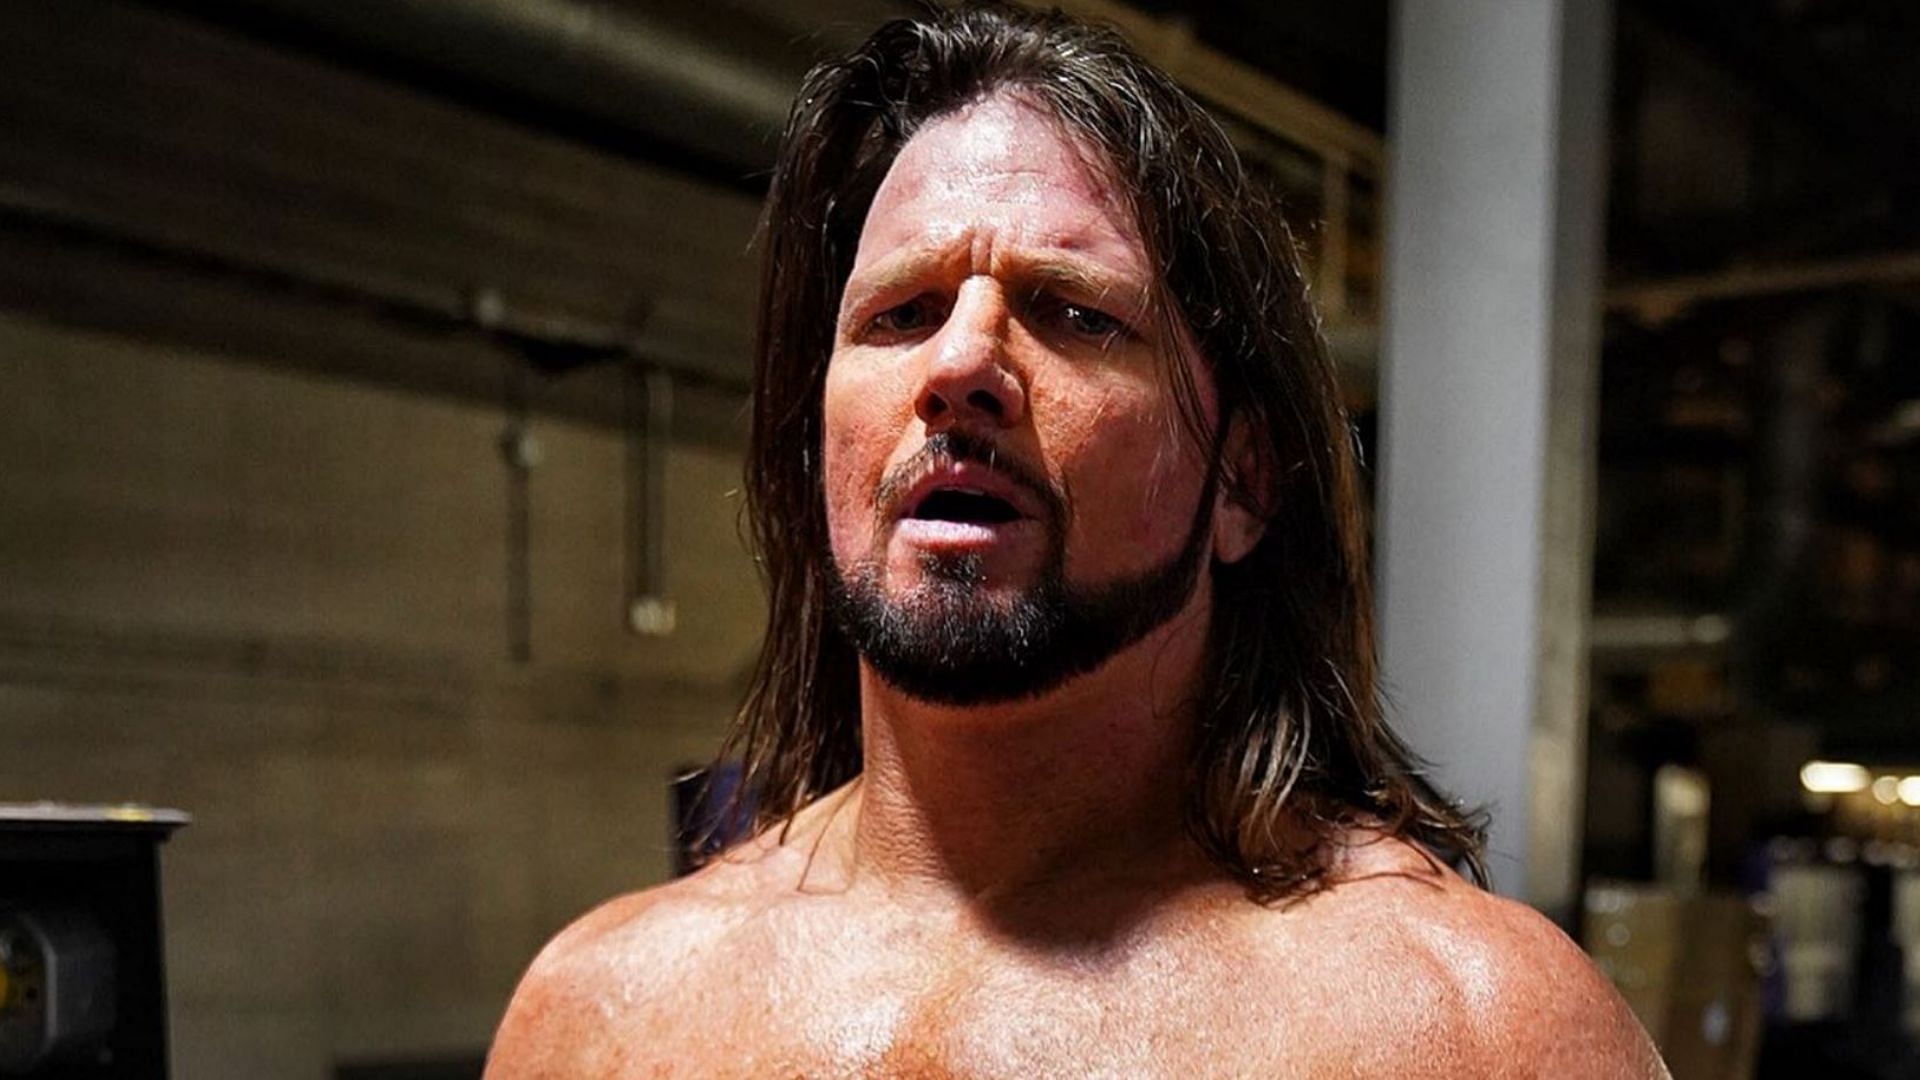 Former two-time WWE Champion AJ Styles